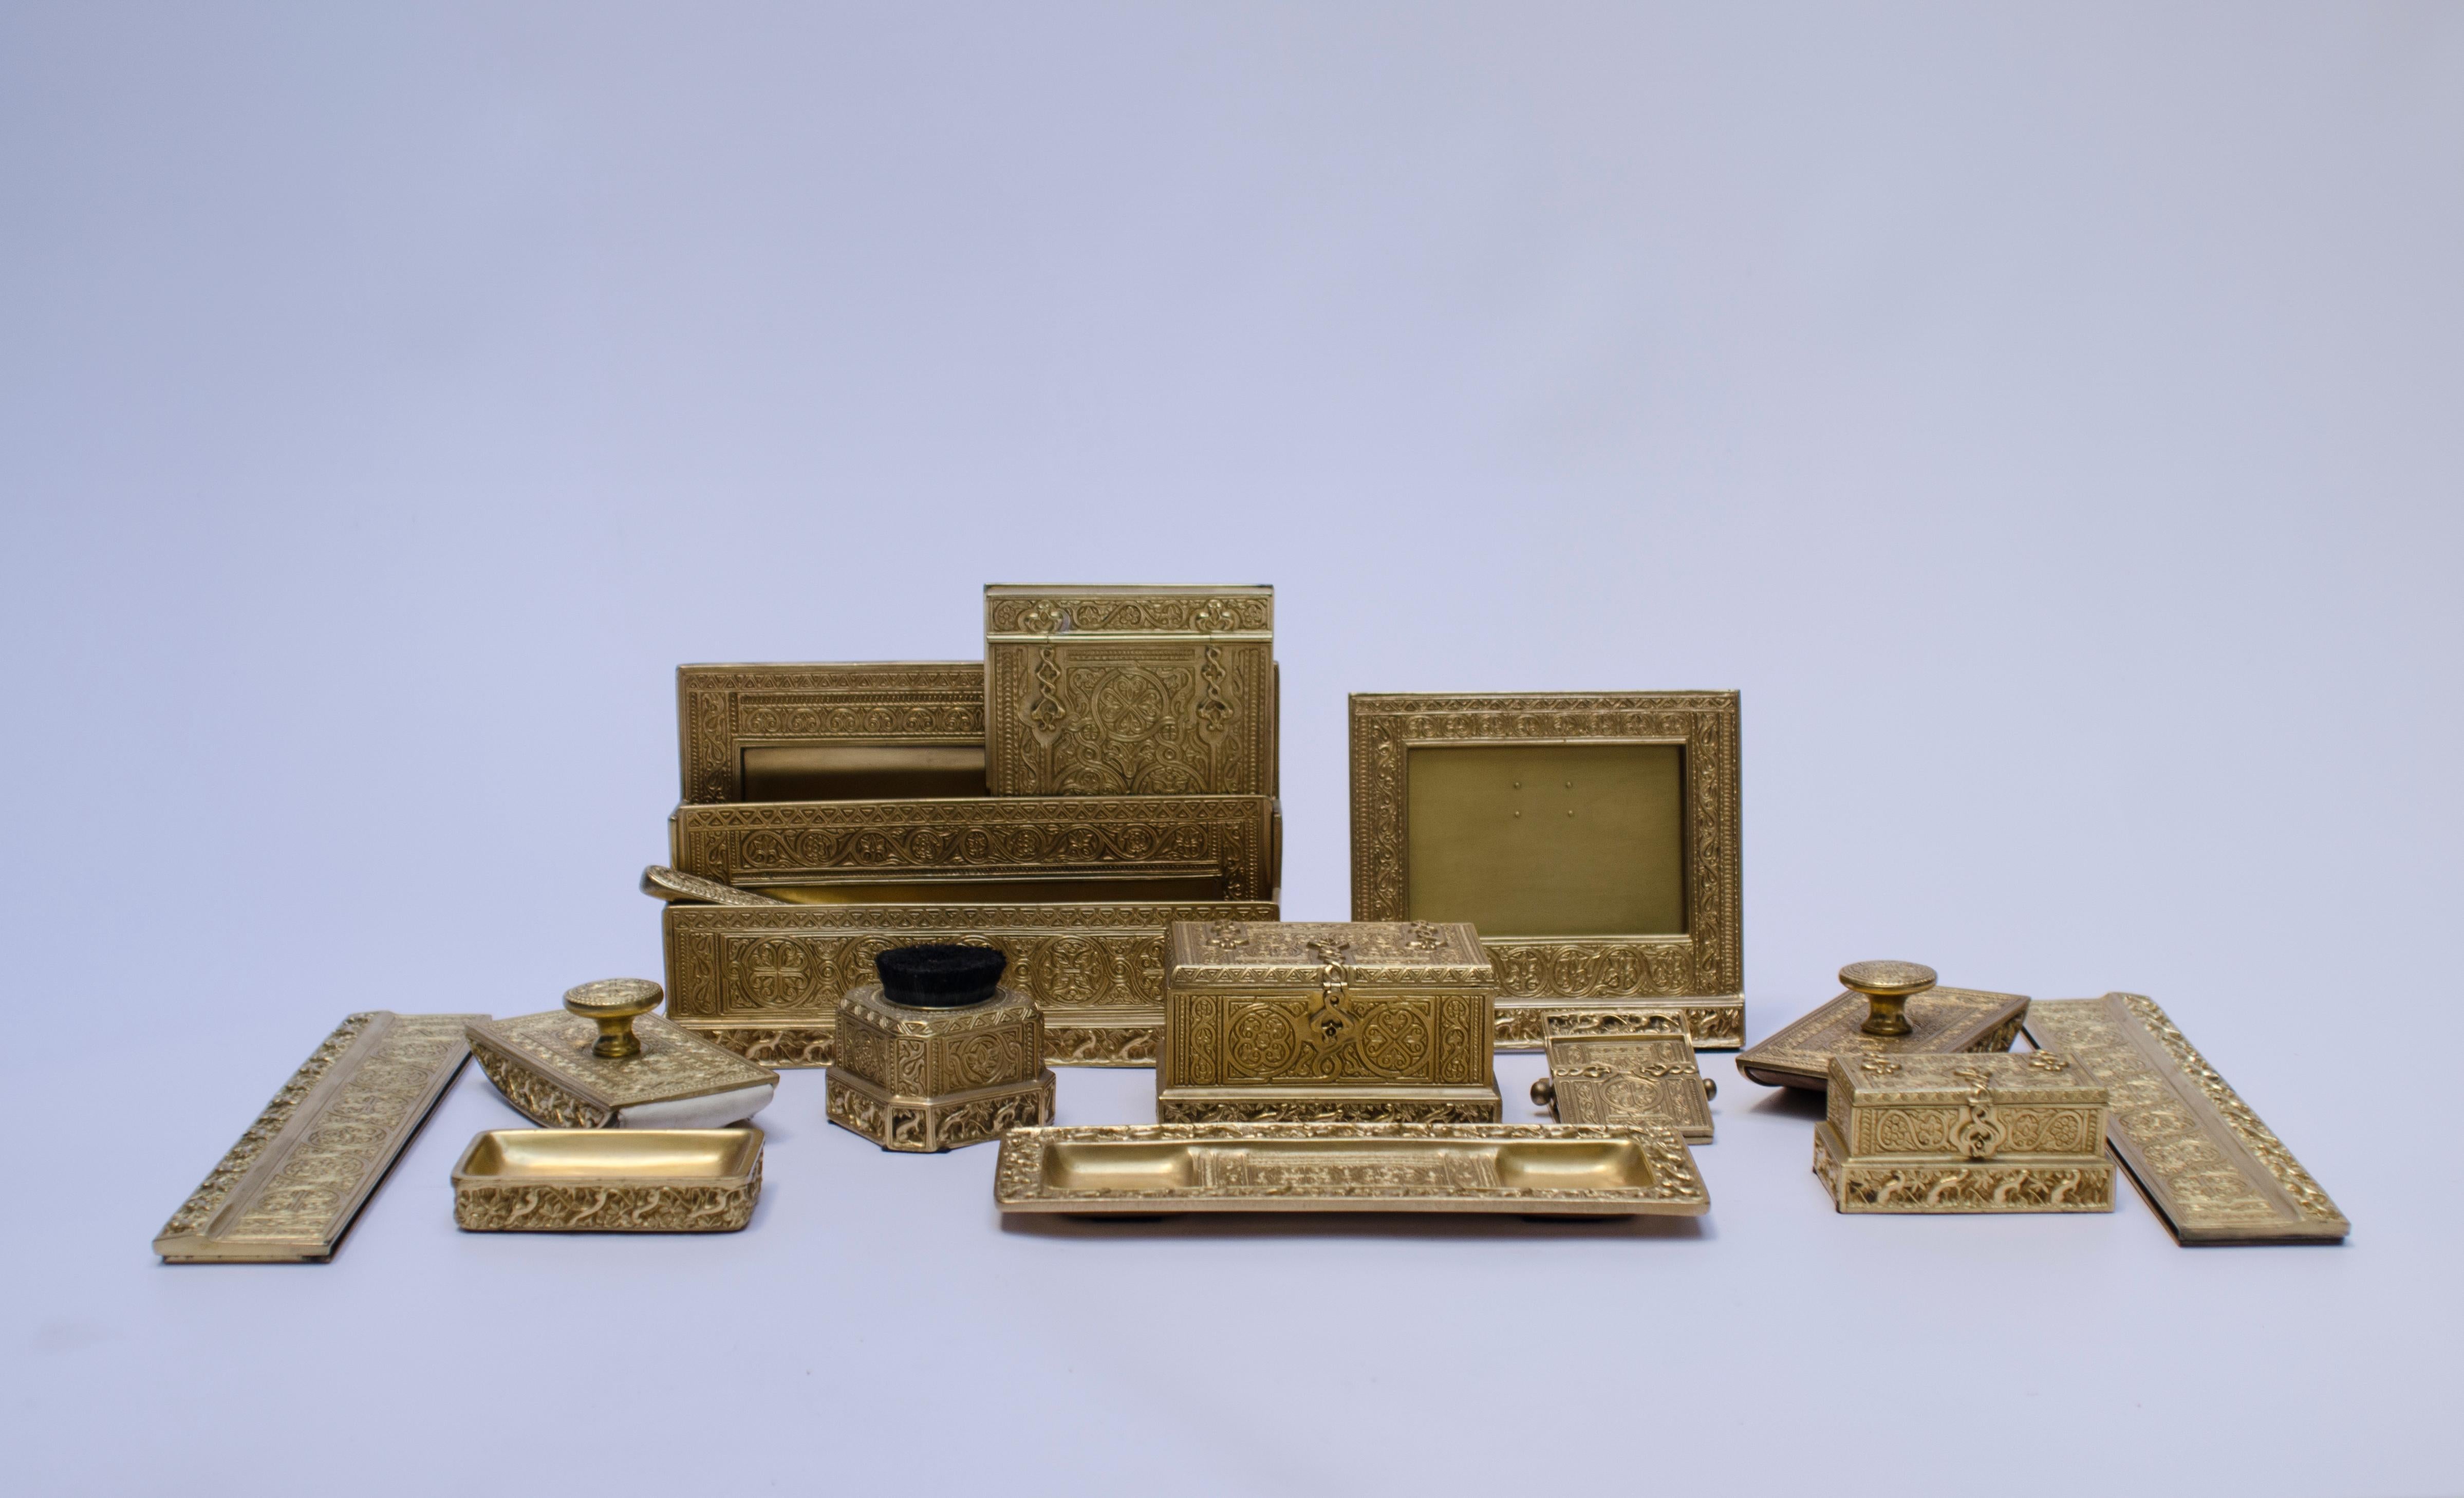 Desk set made of gilded bronze (Ormolu) composed of 14 “Venetian” model pieces, made by TIFFANY & Co, (1837 - present). Signed TIFFANY STUDIOS, NEW YORK, 1647.

United States, CIRCA 1910.